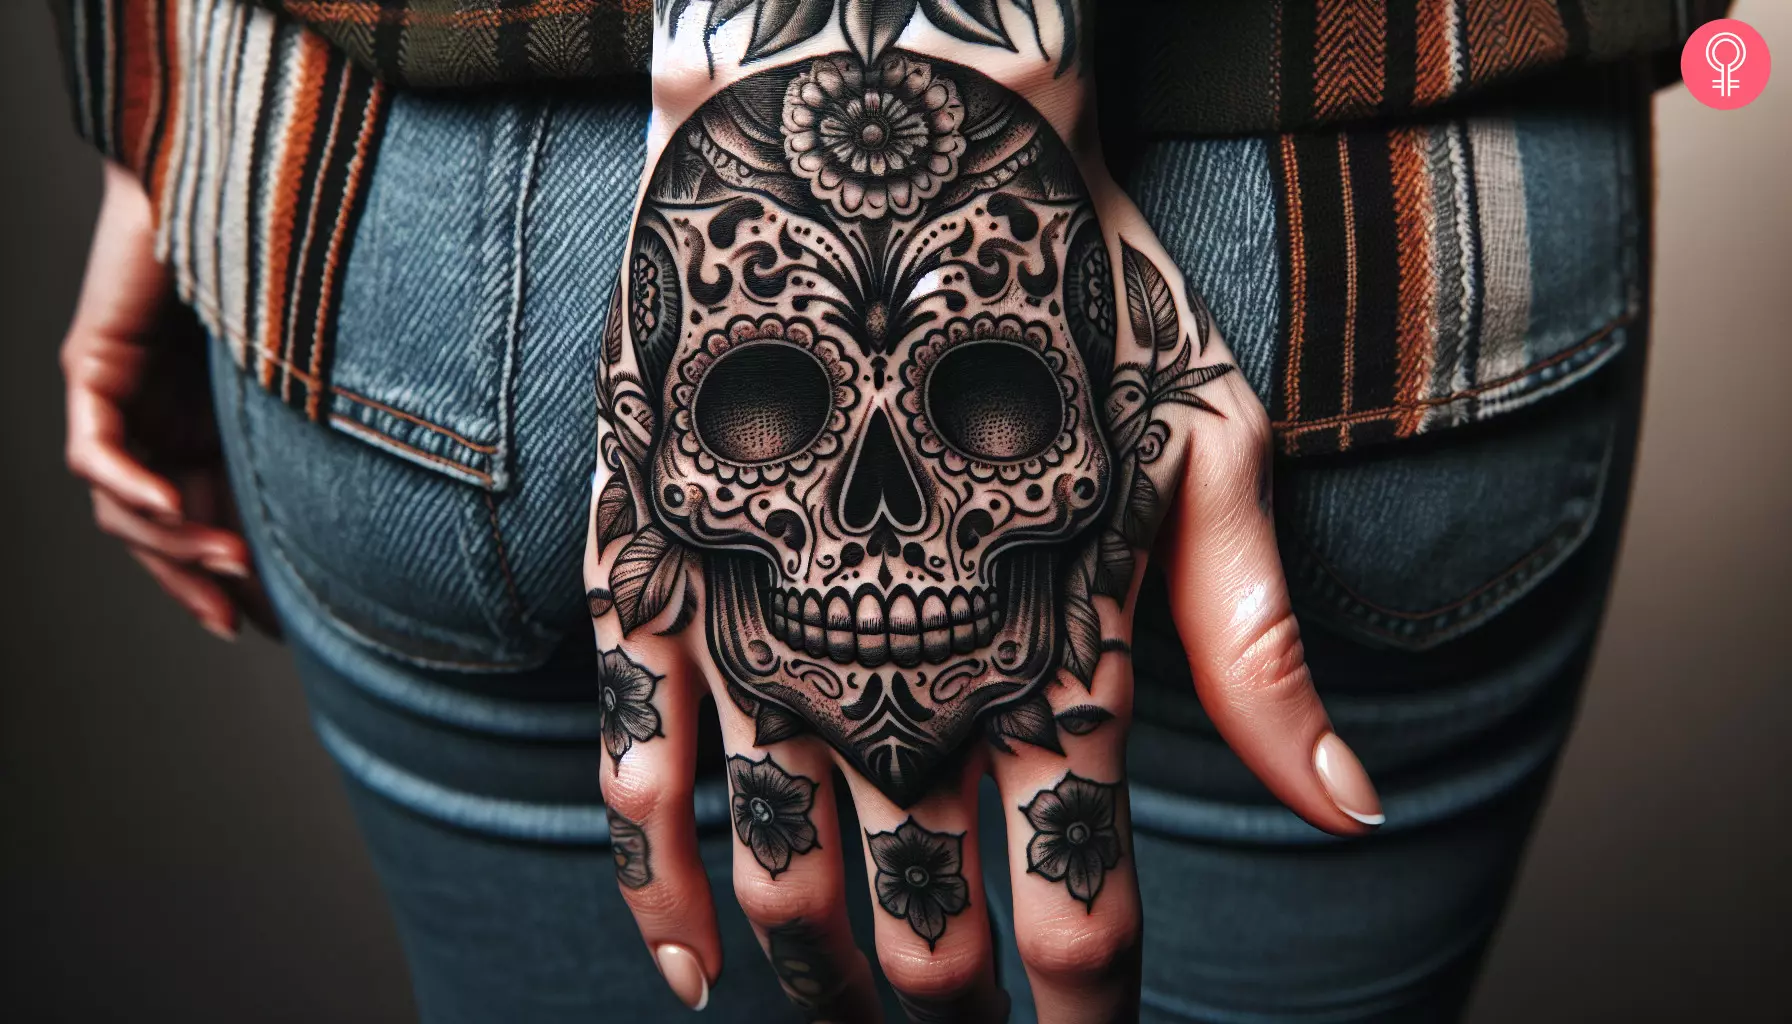 Woman with day of the dead skull tattoo on her hand